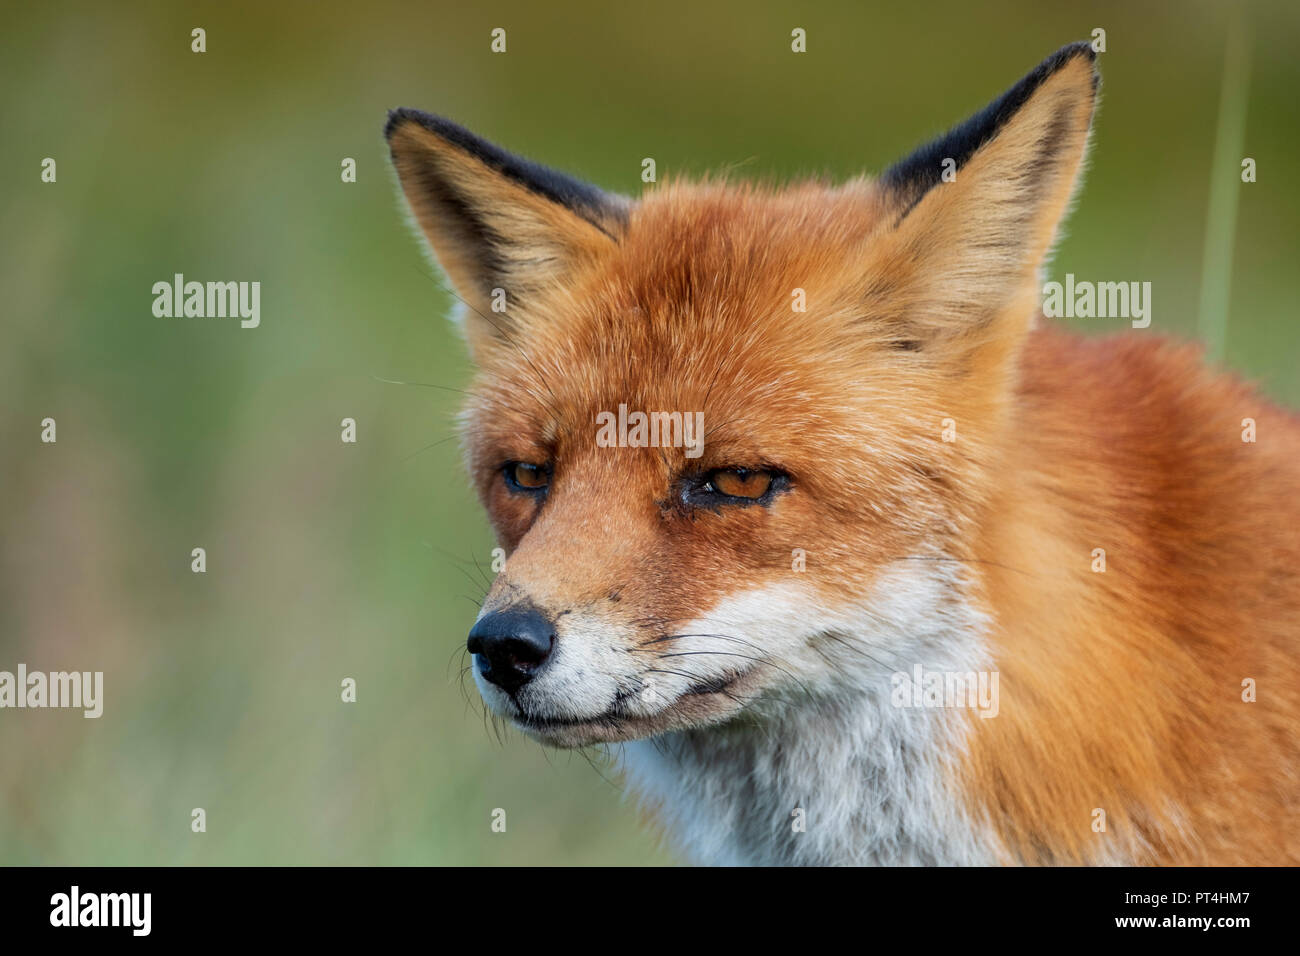 Head of a staring European red fox (Vulpes vulpes) close up Stock Photo